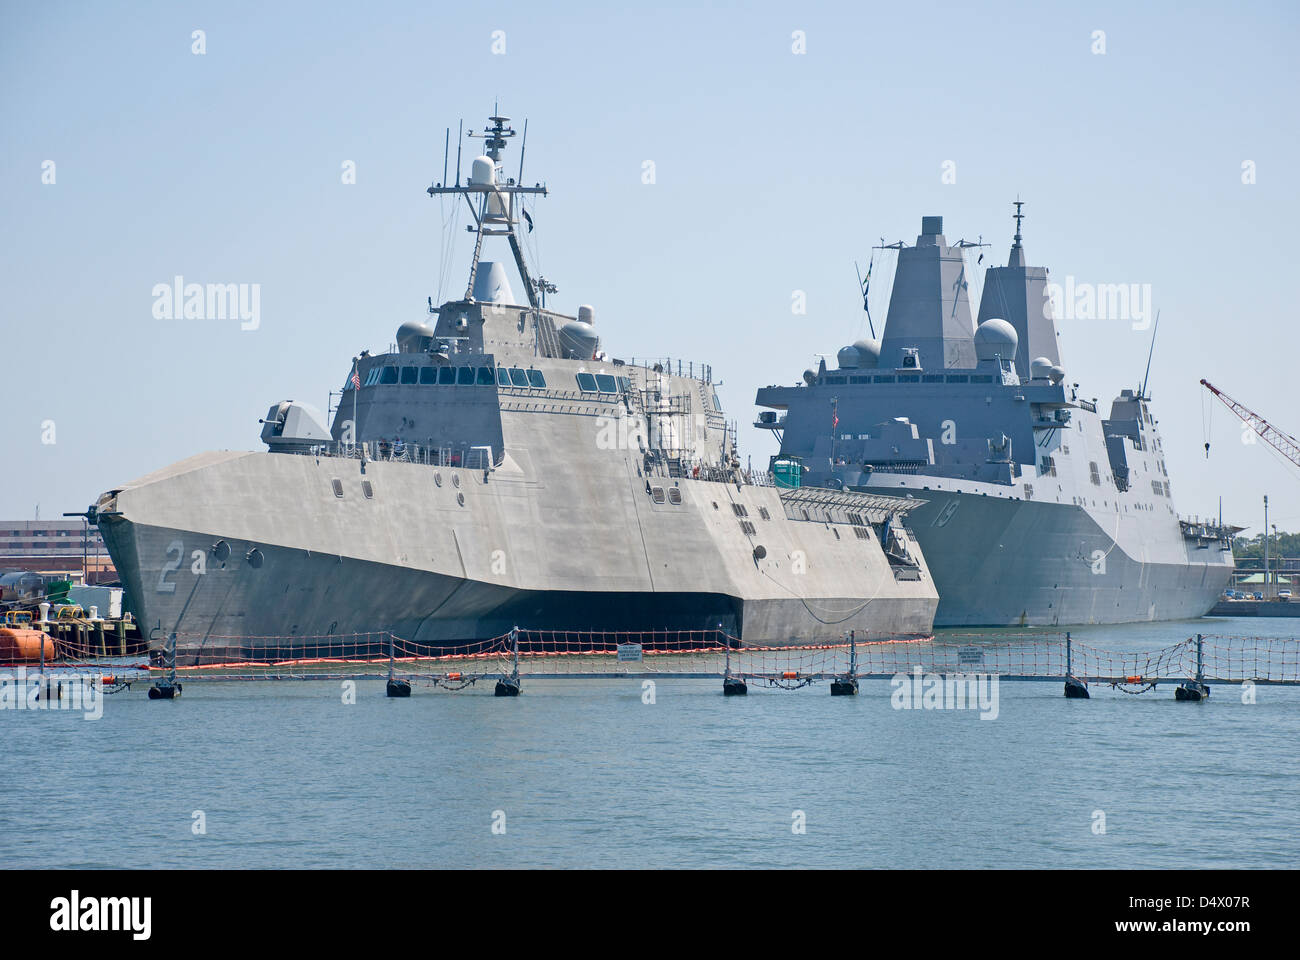 The USS Independence (LCS-2), foreground, and USS Mesa Verde (LPD 19) docked together at Naval Station Norfolk, Virginia, USA. Stock Photo